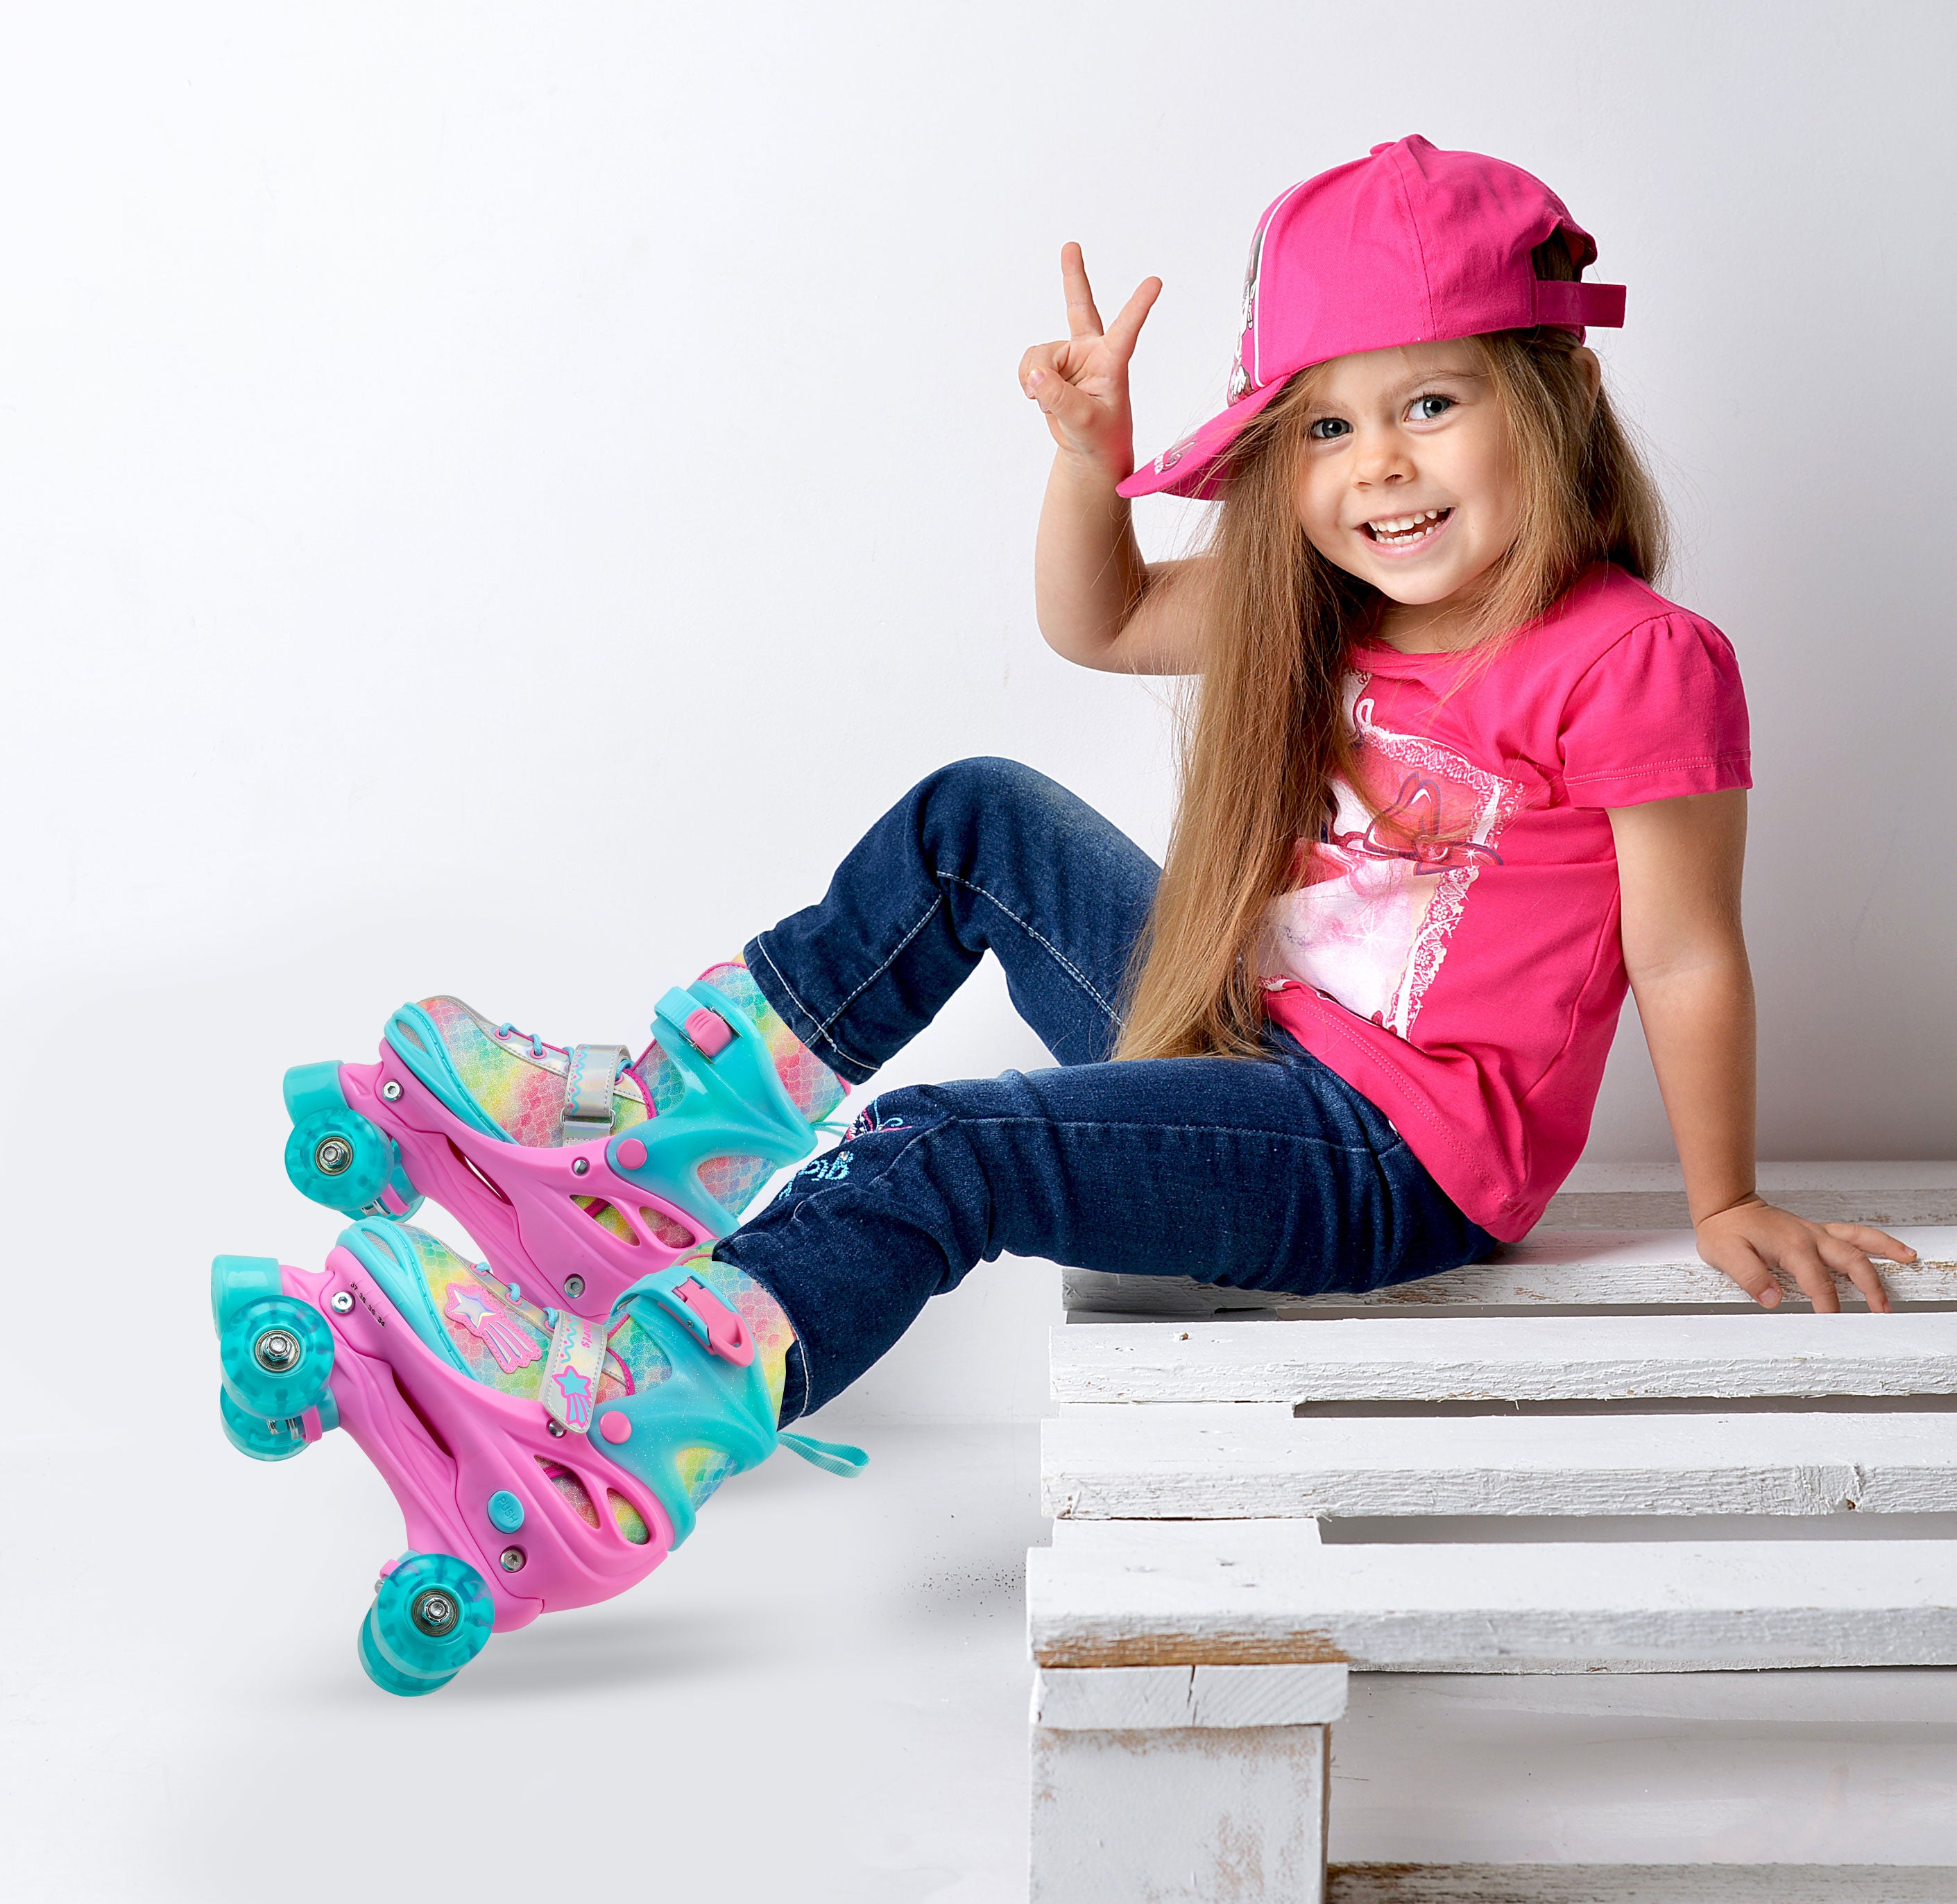 Toddler Skates For 3-Year Old: What You Need To Know